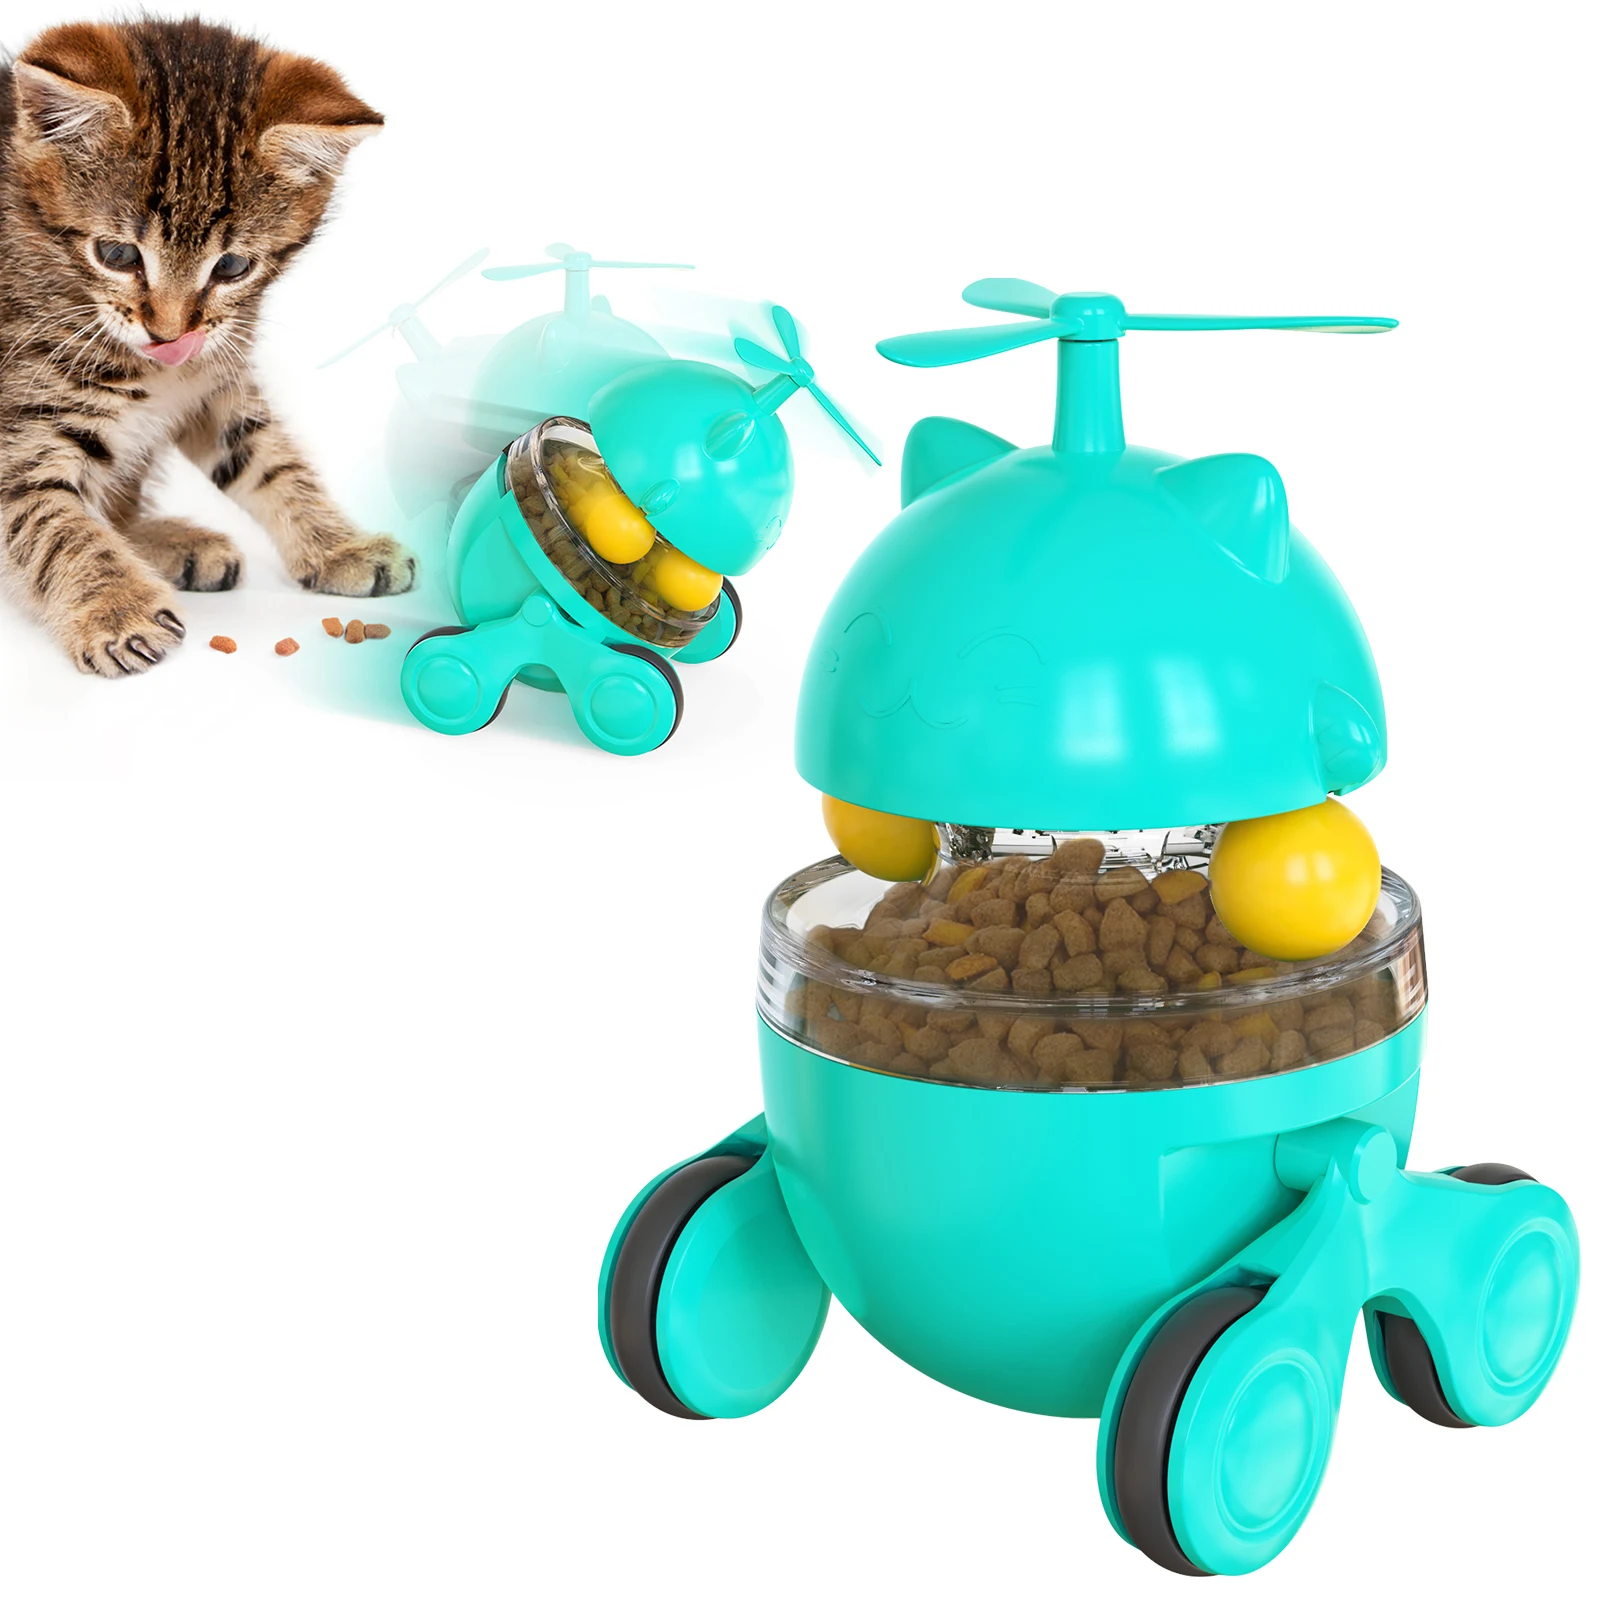 

Pet supplies factory Amazon's new pet product explosion tumbler cat turntable leaking food ball tease cat car toy, Picture